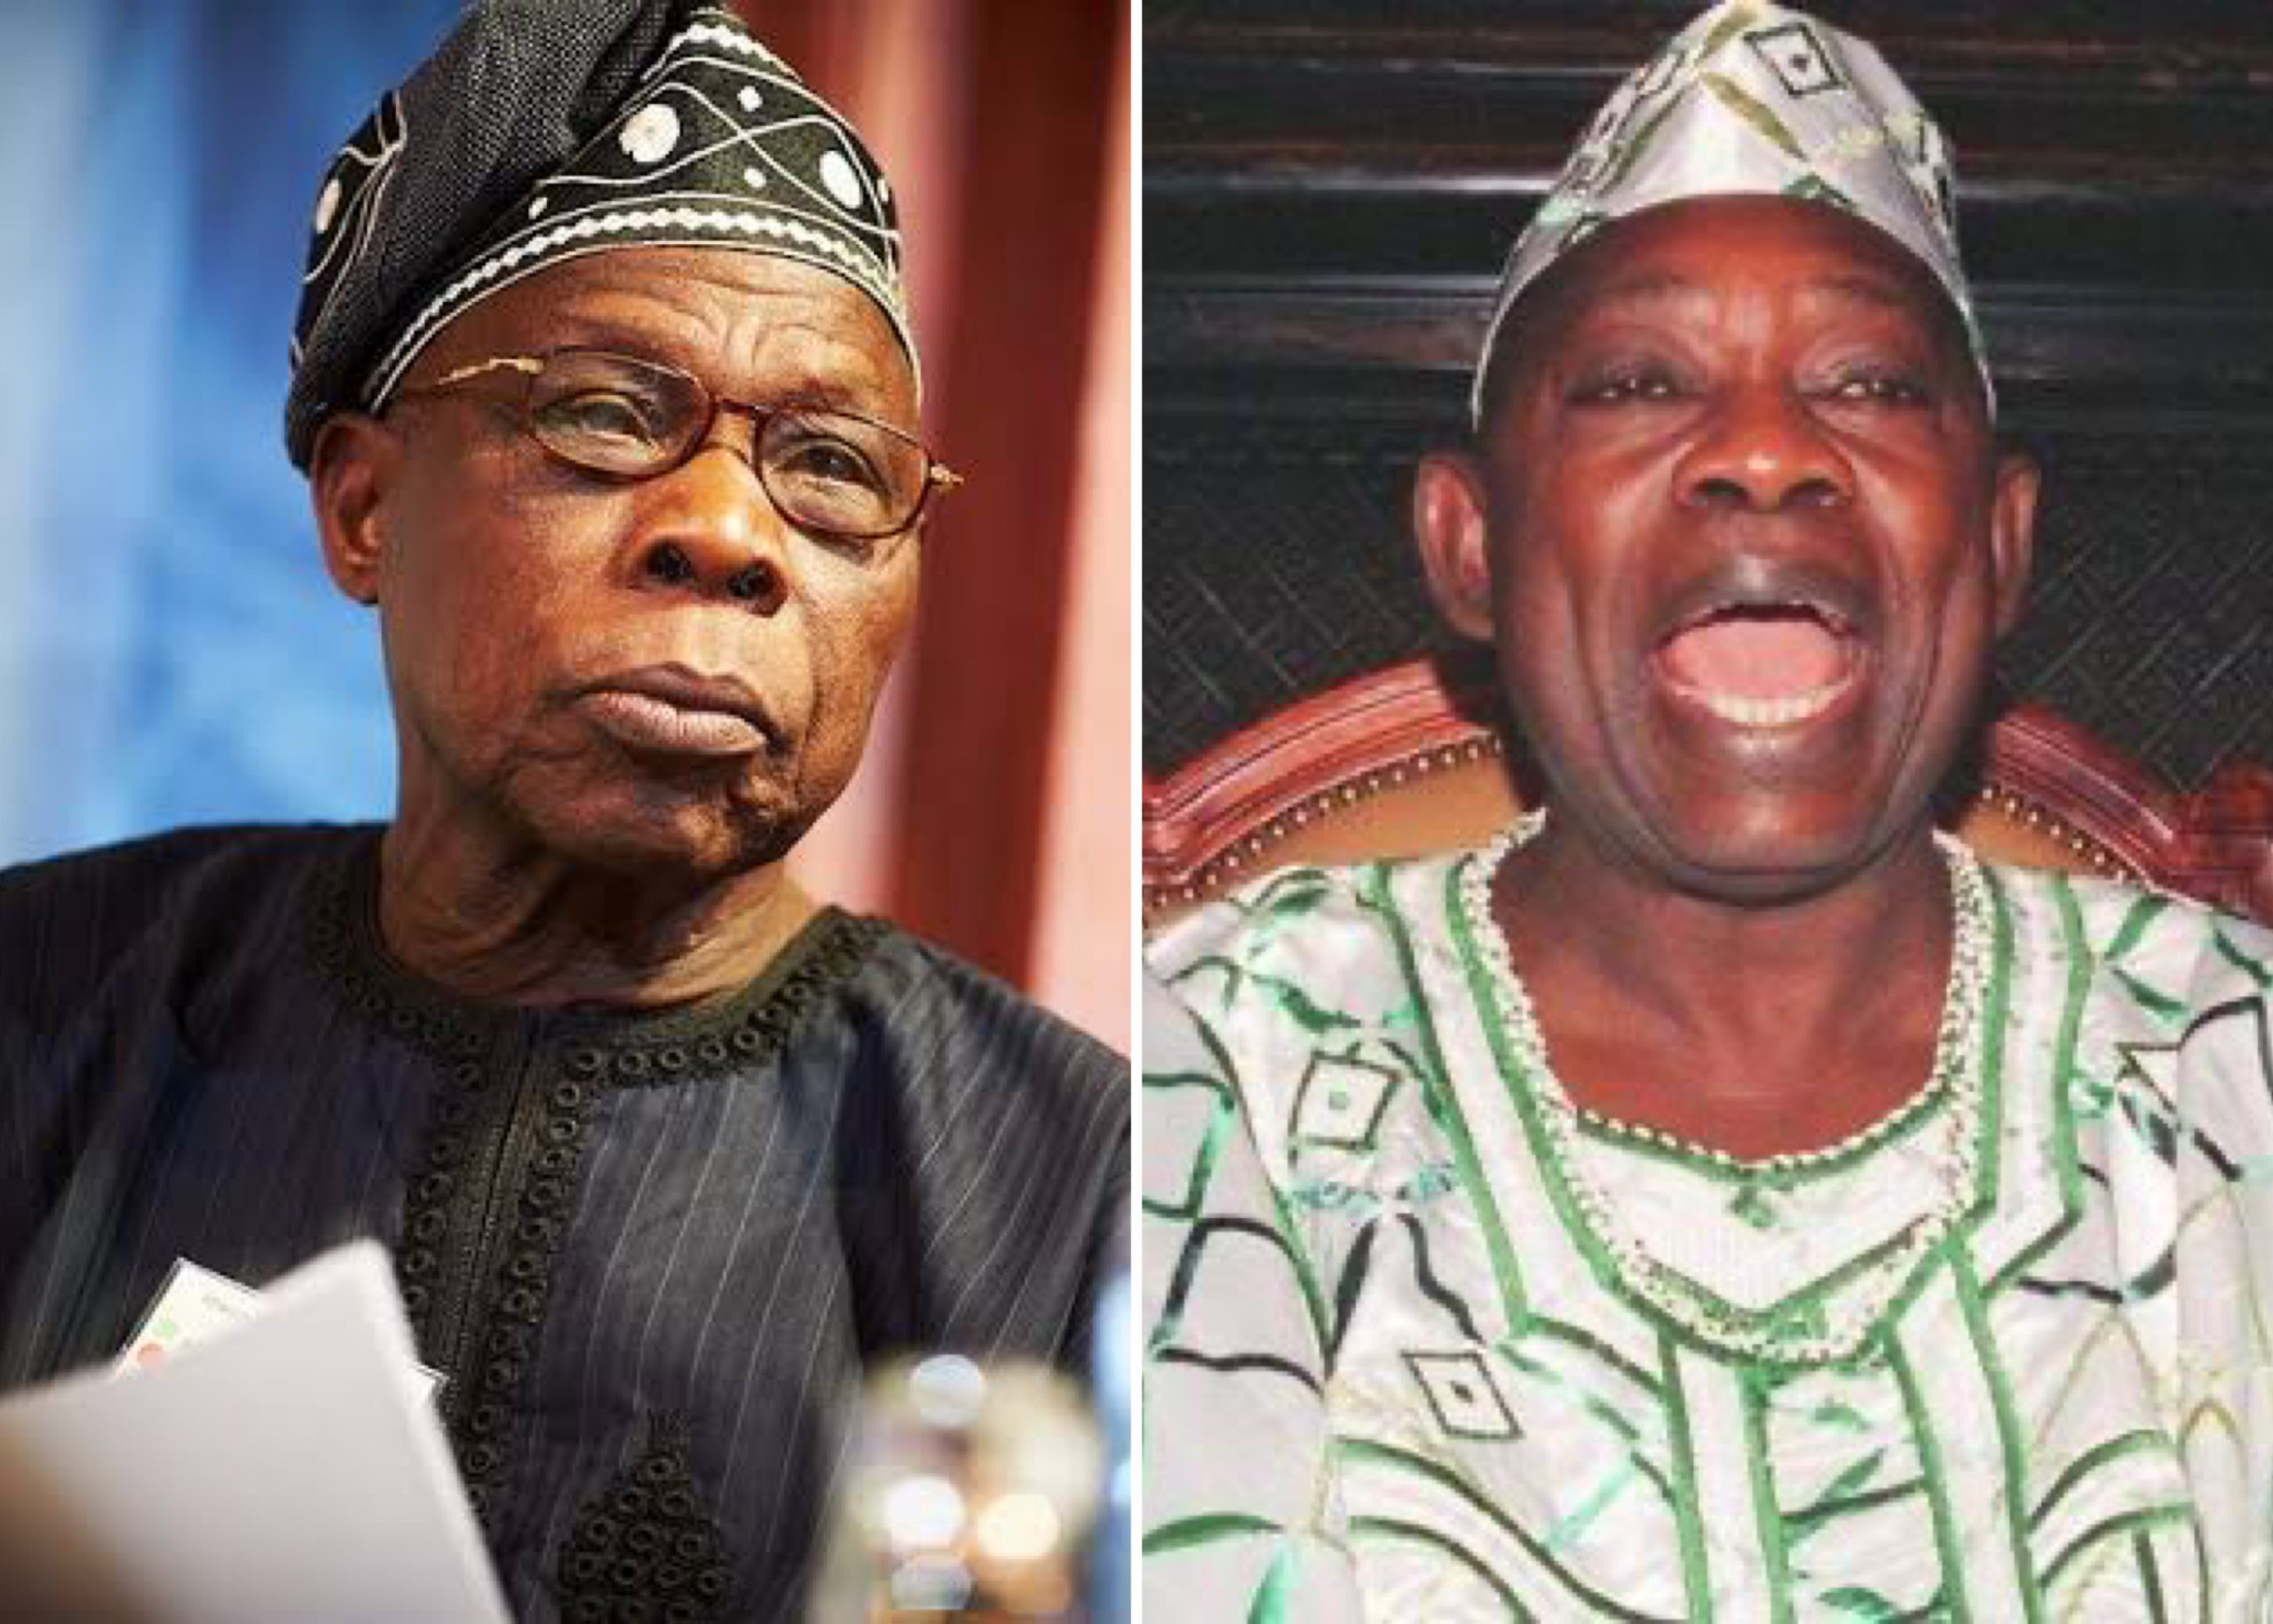 MKO Abiola: June 12 Election Was Annulled Due To ‘Bad Belle’, Says Obasanjo